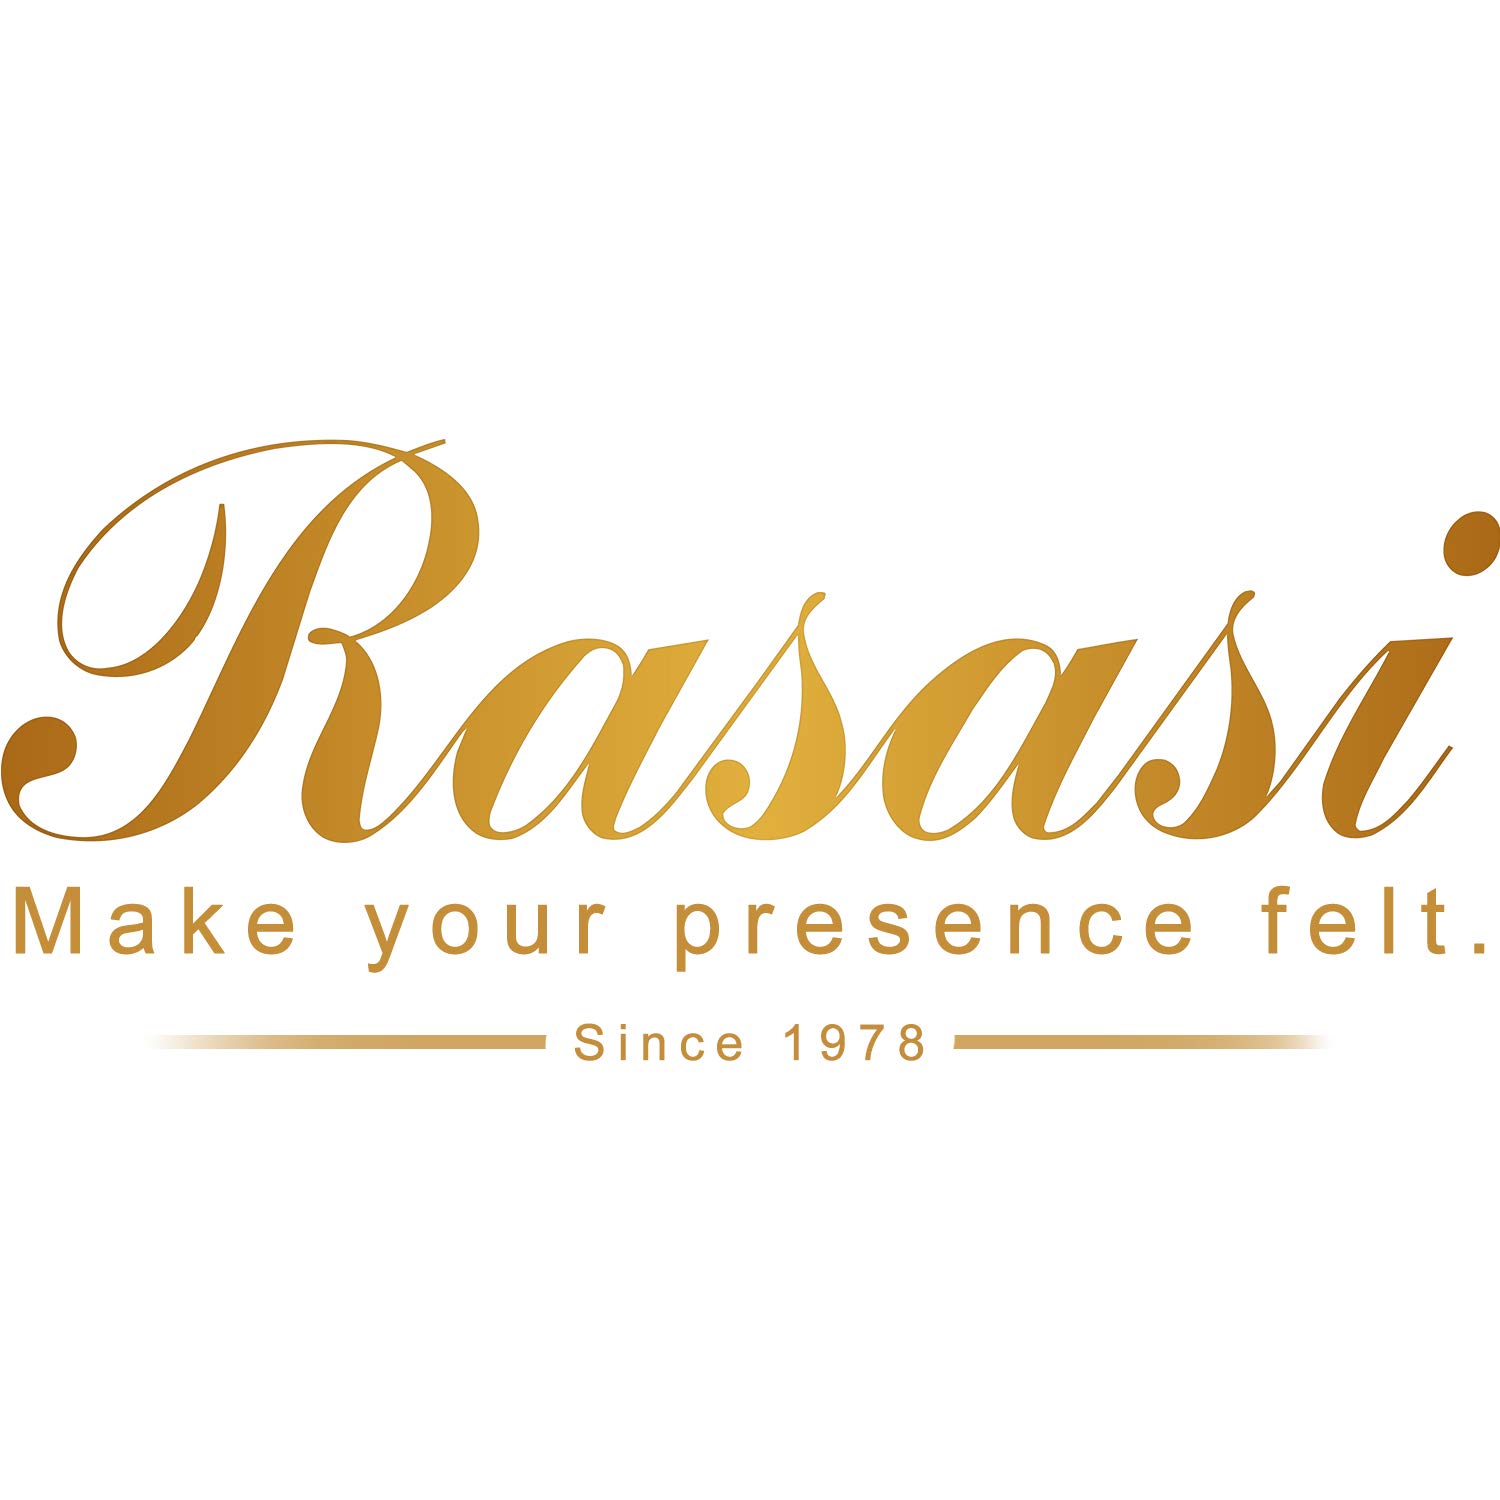 RASASI Hawas EDP 100ml(3.4 oz) | Long-Lasting Pour Homme Spray, Aquatic Scent Designed to Embody Masculine Strength and Vigor (Hawas for Him)